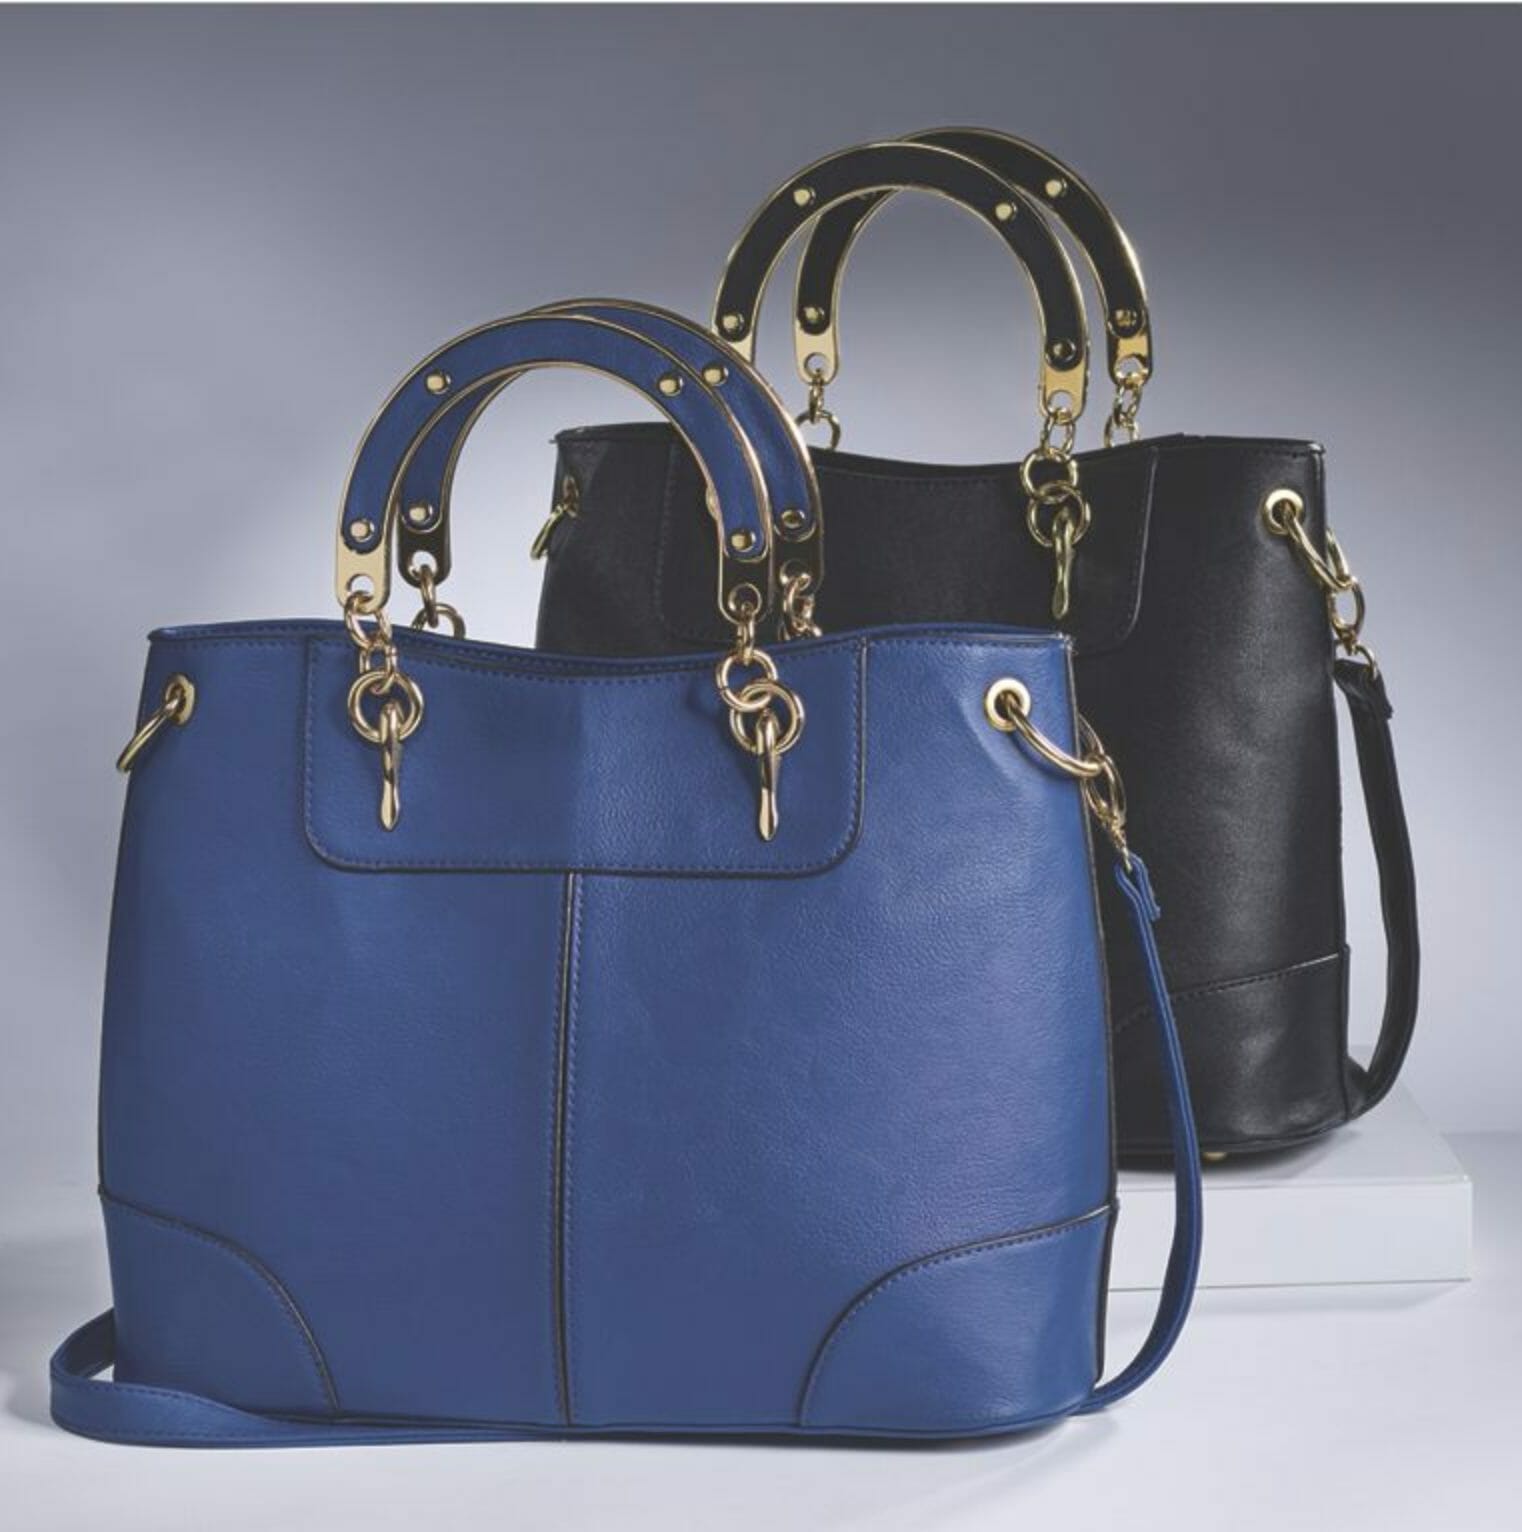 Two faux leather satchel bags with gold curved metal handles with gold studs, one in royal blue and one in black.